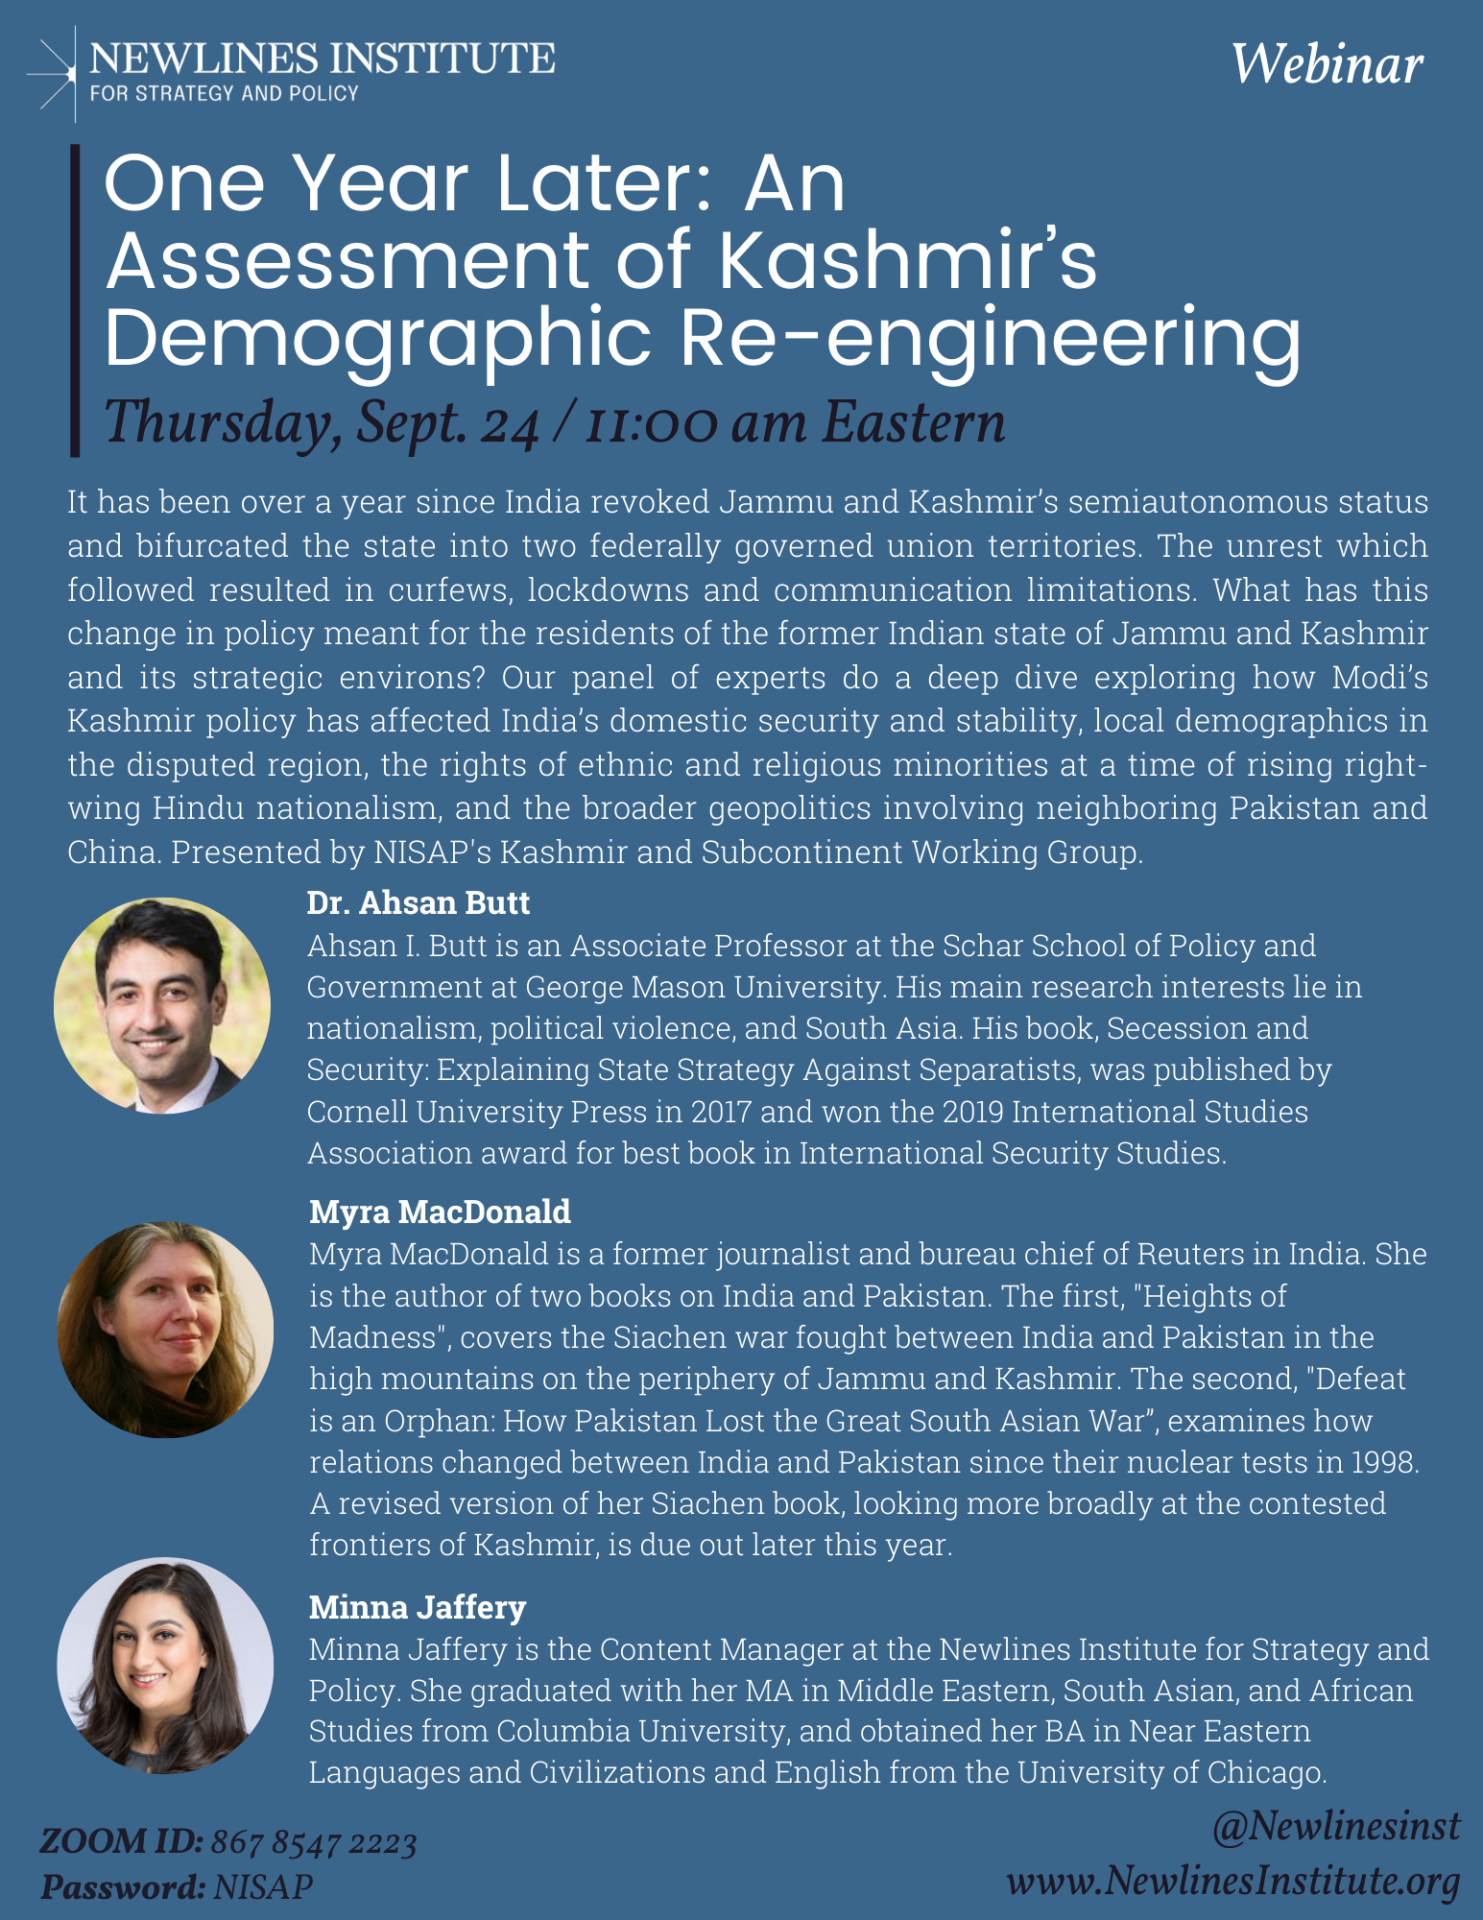 One Year Later: An Assessment of Kashmir’s Demographic Re-engineering